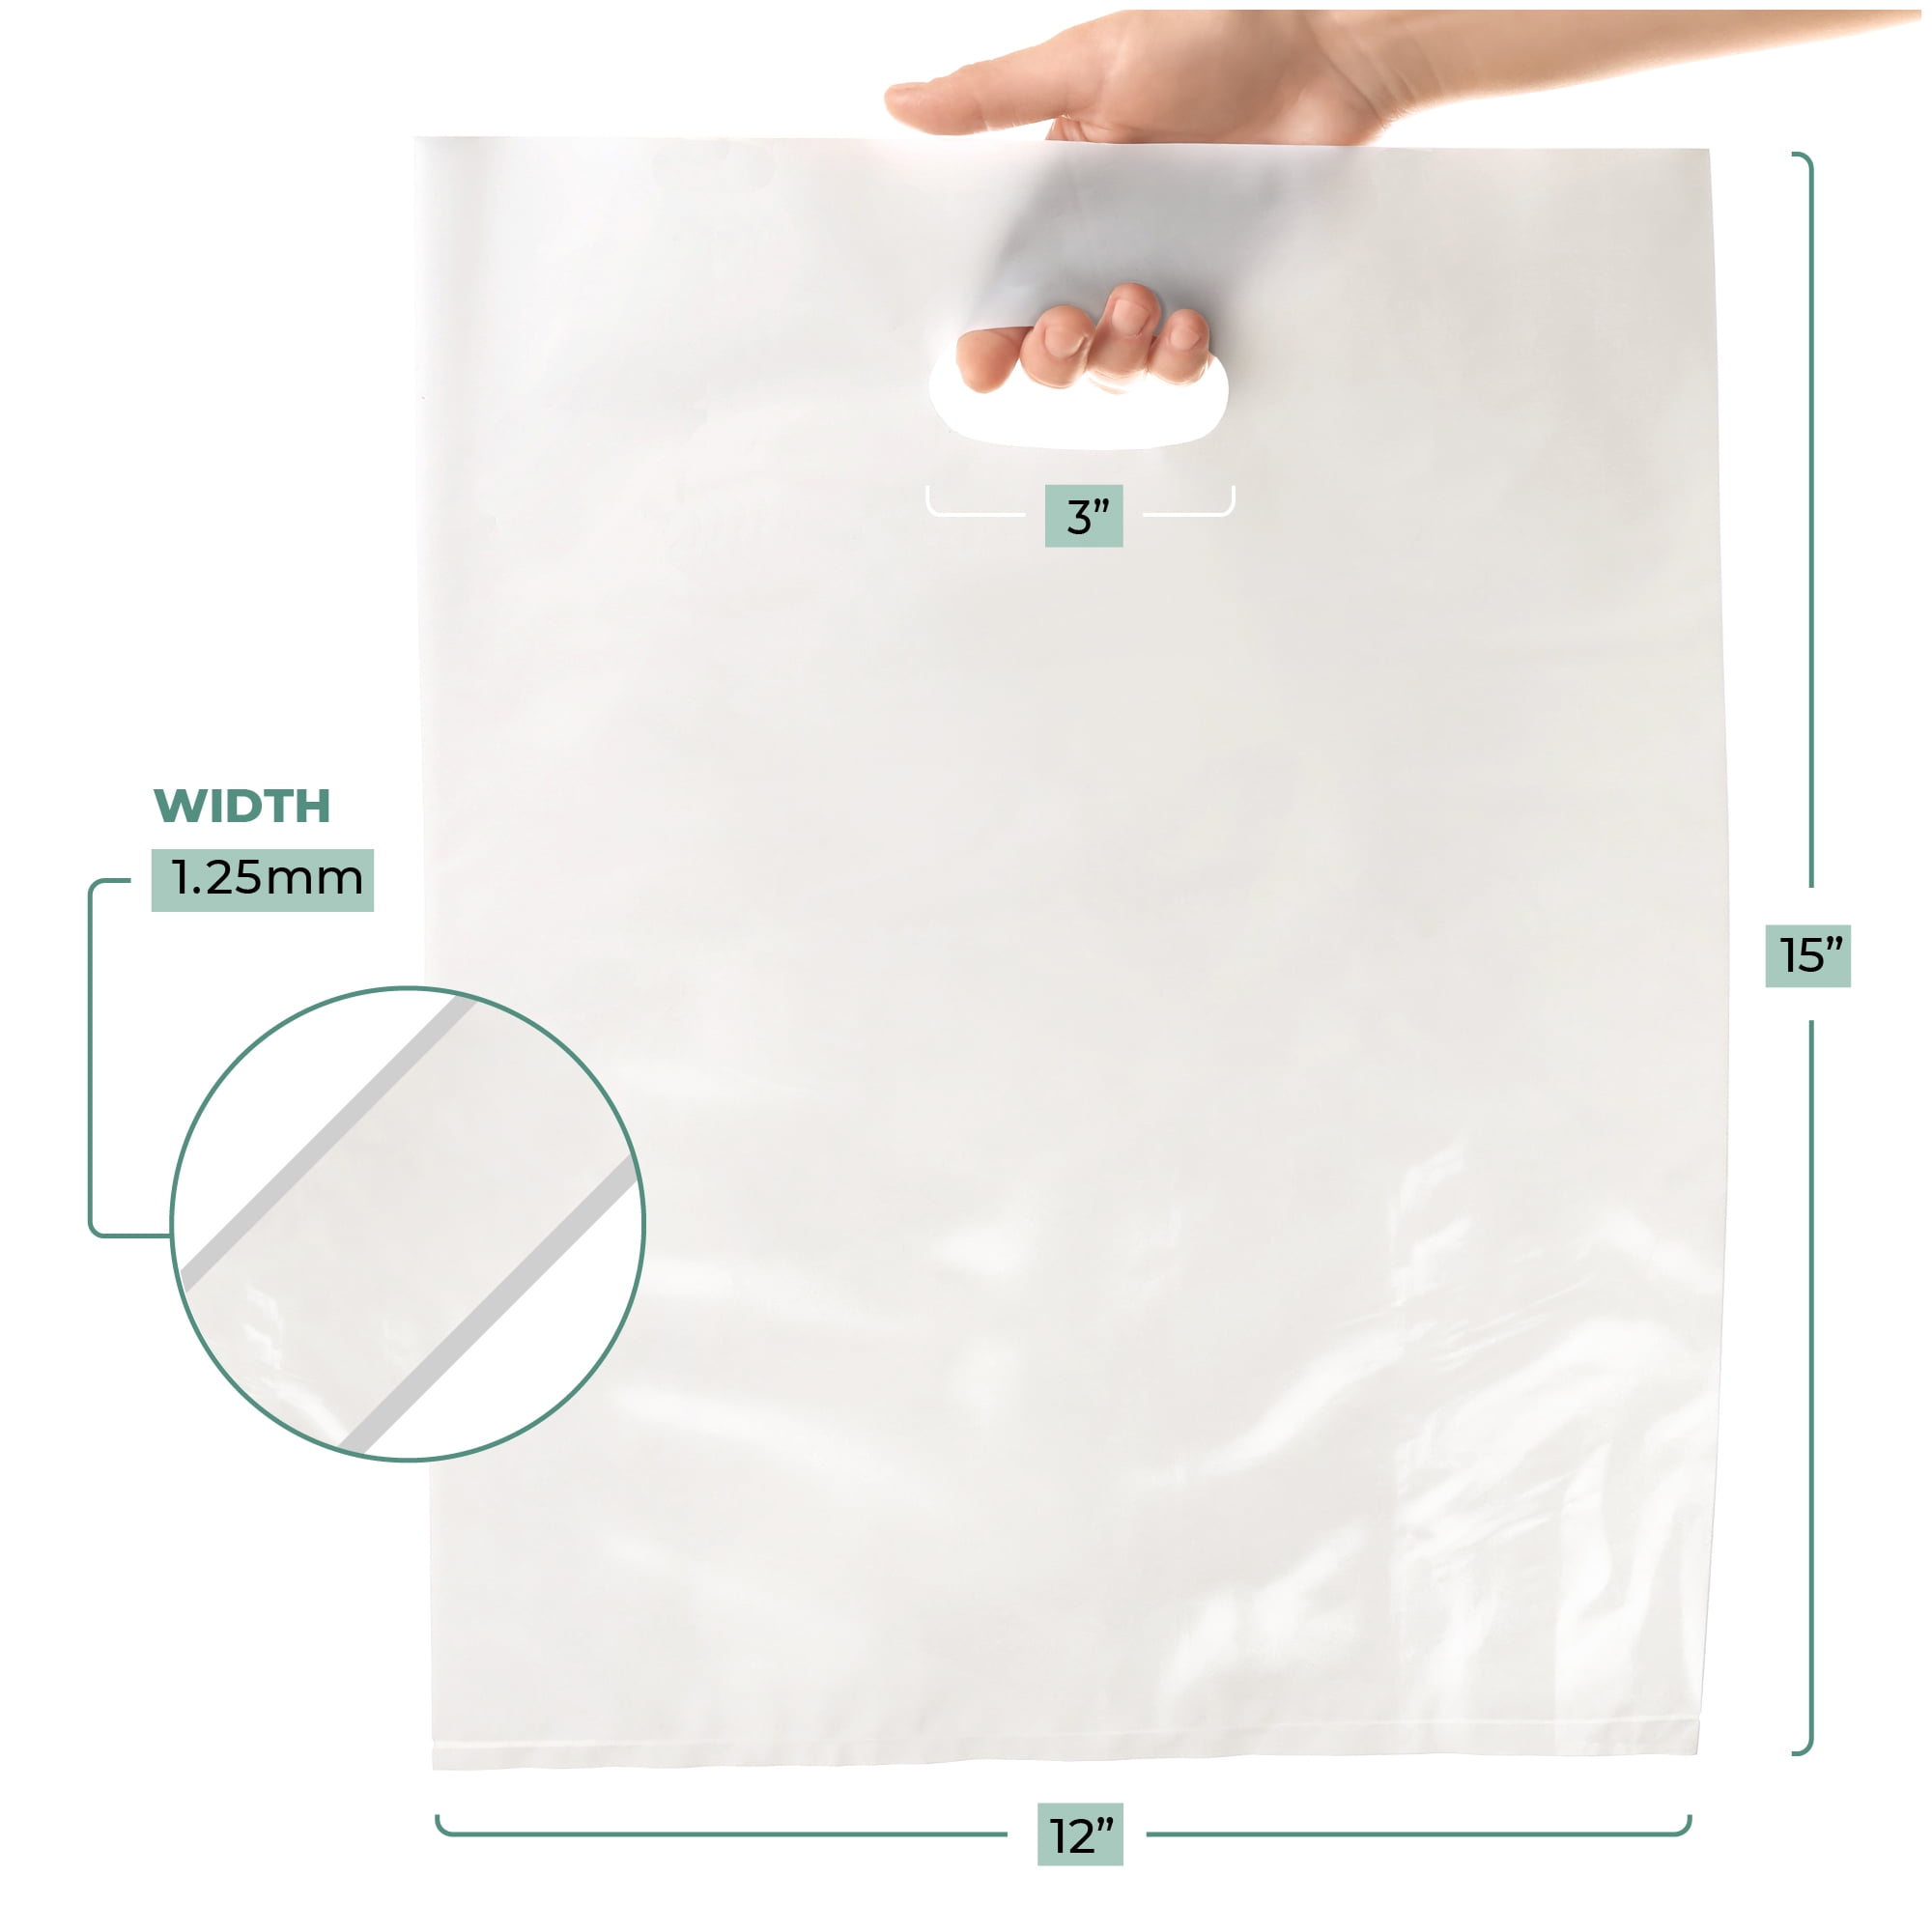  Shopping Bags for Boutique - 25 Pack White Plastic Totes with  Soft Loop Handles, Large Opaque Bags in Bulk for Small Business, Retail  Stores, Parties, Events, Take Out, Thank You, Gifts 